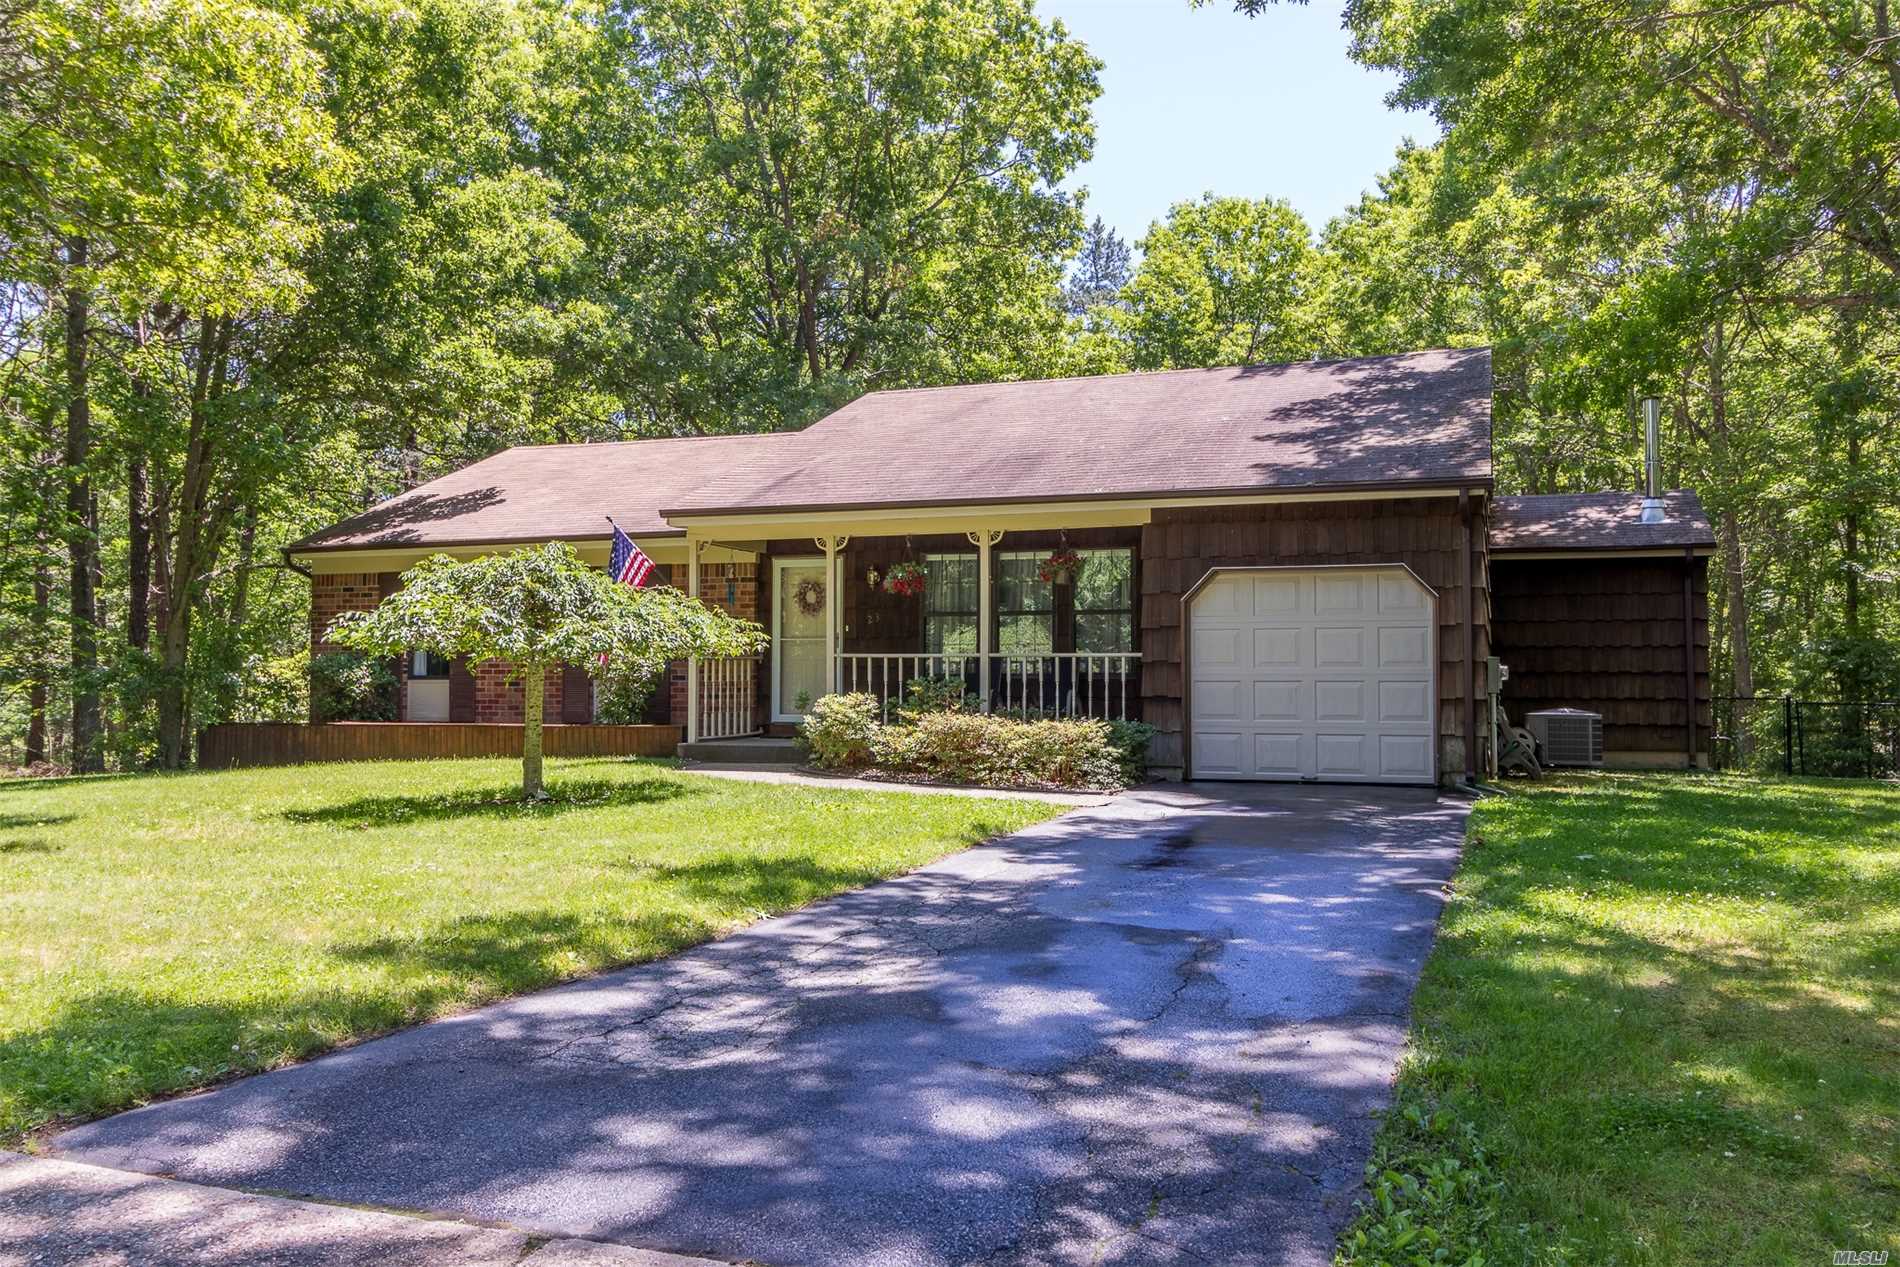 Beautiful Sprawling Ranch - Master Bedroom With Bath, Oak Hardwood Floors, Cac, Air Filtration System. Anderson Windows, Stainless Steel Appliances, New Washer, Dryer, Updated Bath, French Door Leading To Deck, Nestled On 1.43 Acres, Igs, Fenced. Come And See And Fall In Love.